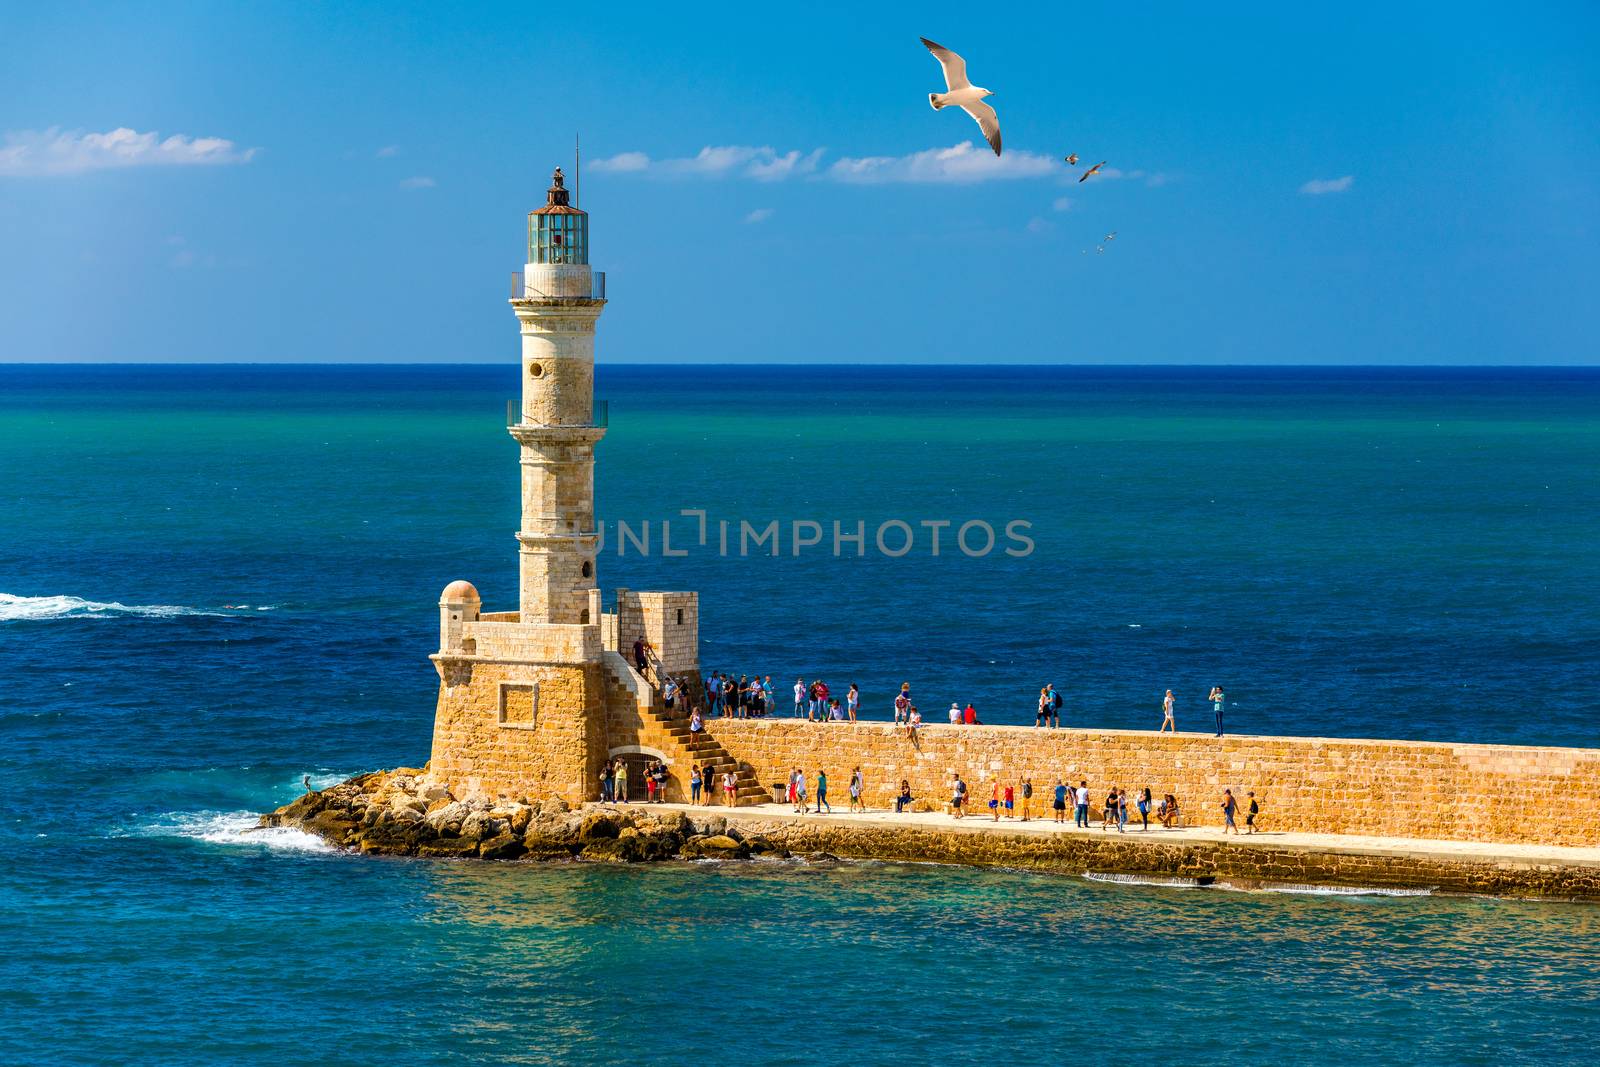 Venetian harbour and lighthouse in old harbour of Chania with seagulls flying over, Crete, Greece. Old venetian lighthouse in Chania, Greece. Lighthouse of the old Venetian port in Chania, Greece.